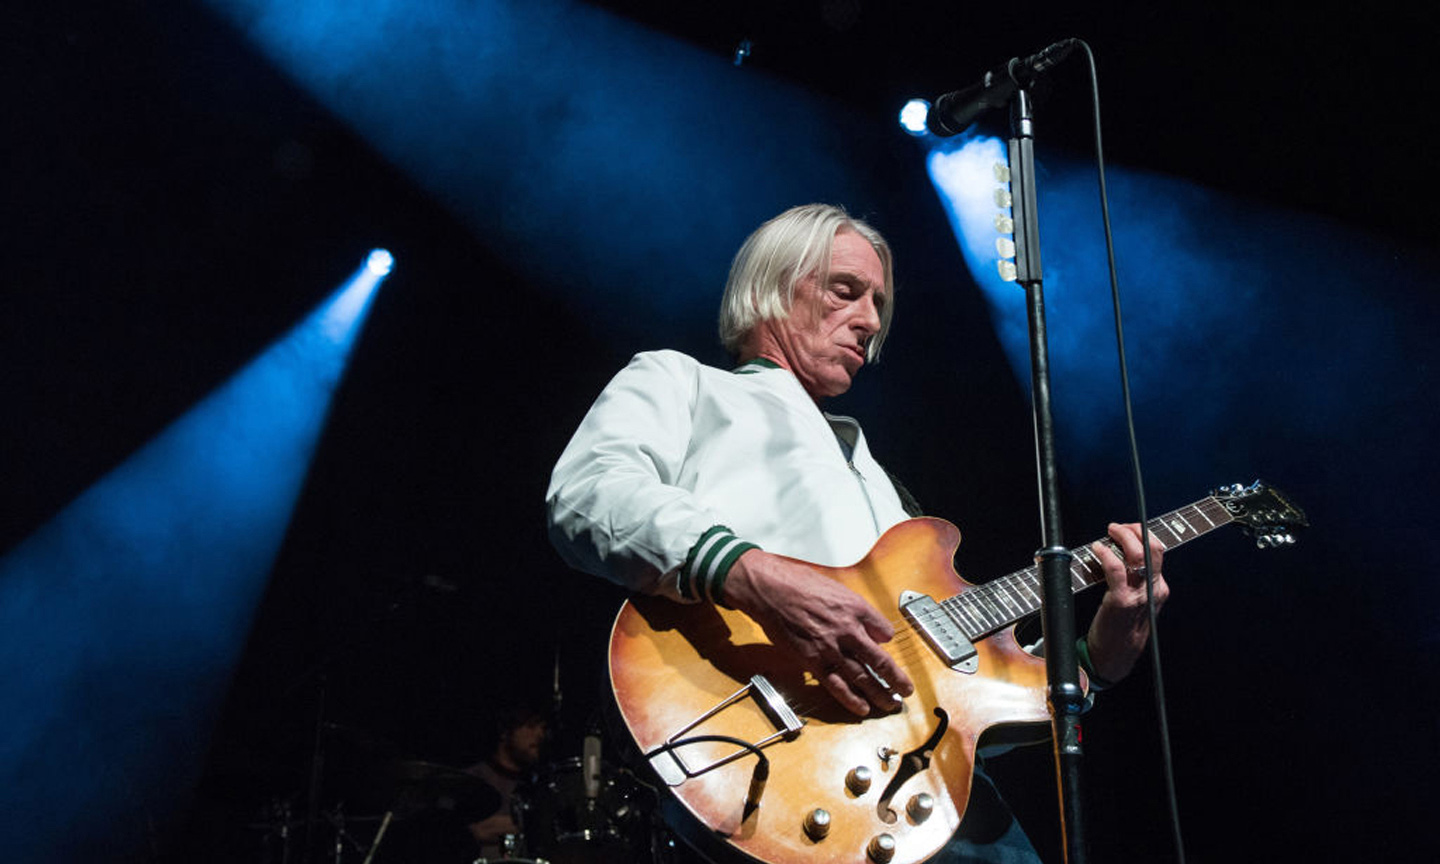 Paul Weller Adds Major UK Outdoor Shows To 2022 Live Itinerary HipHopGet